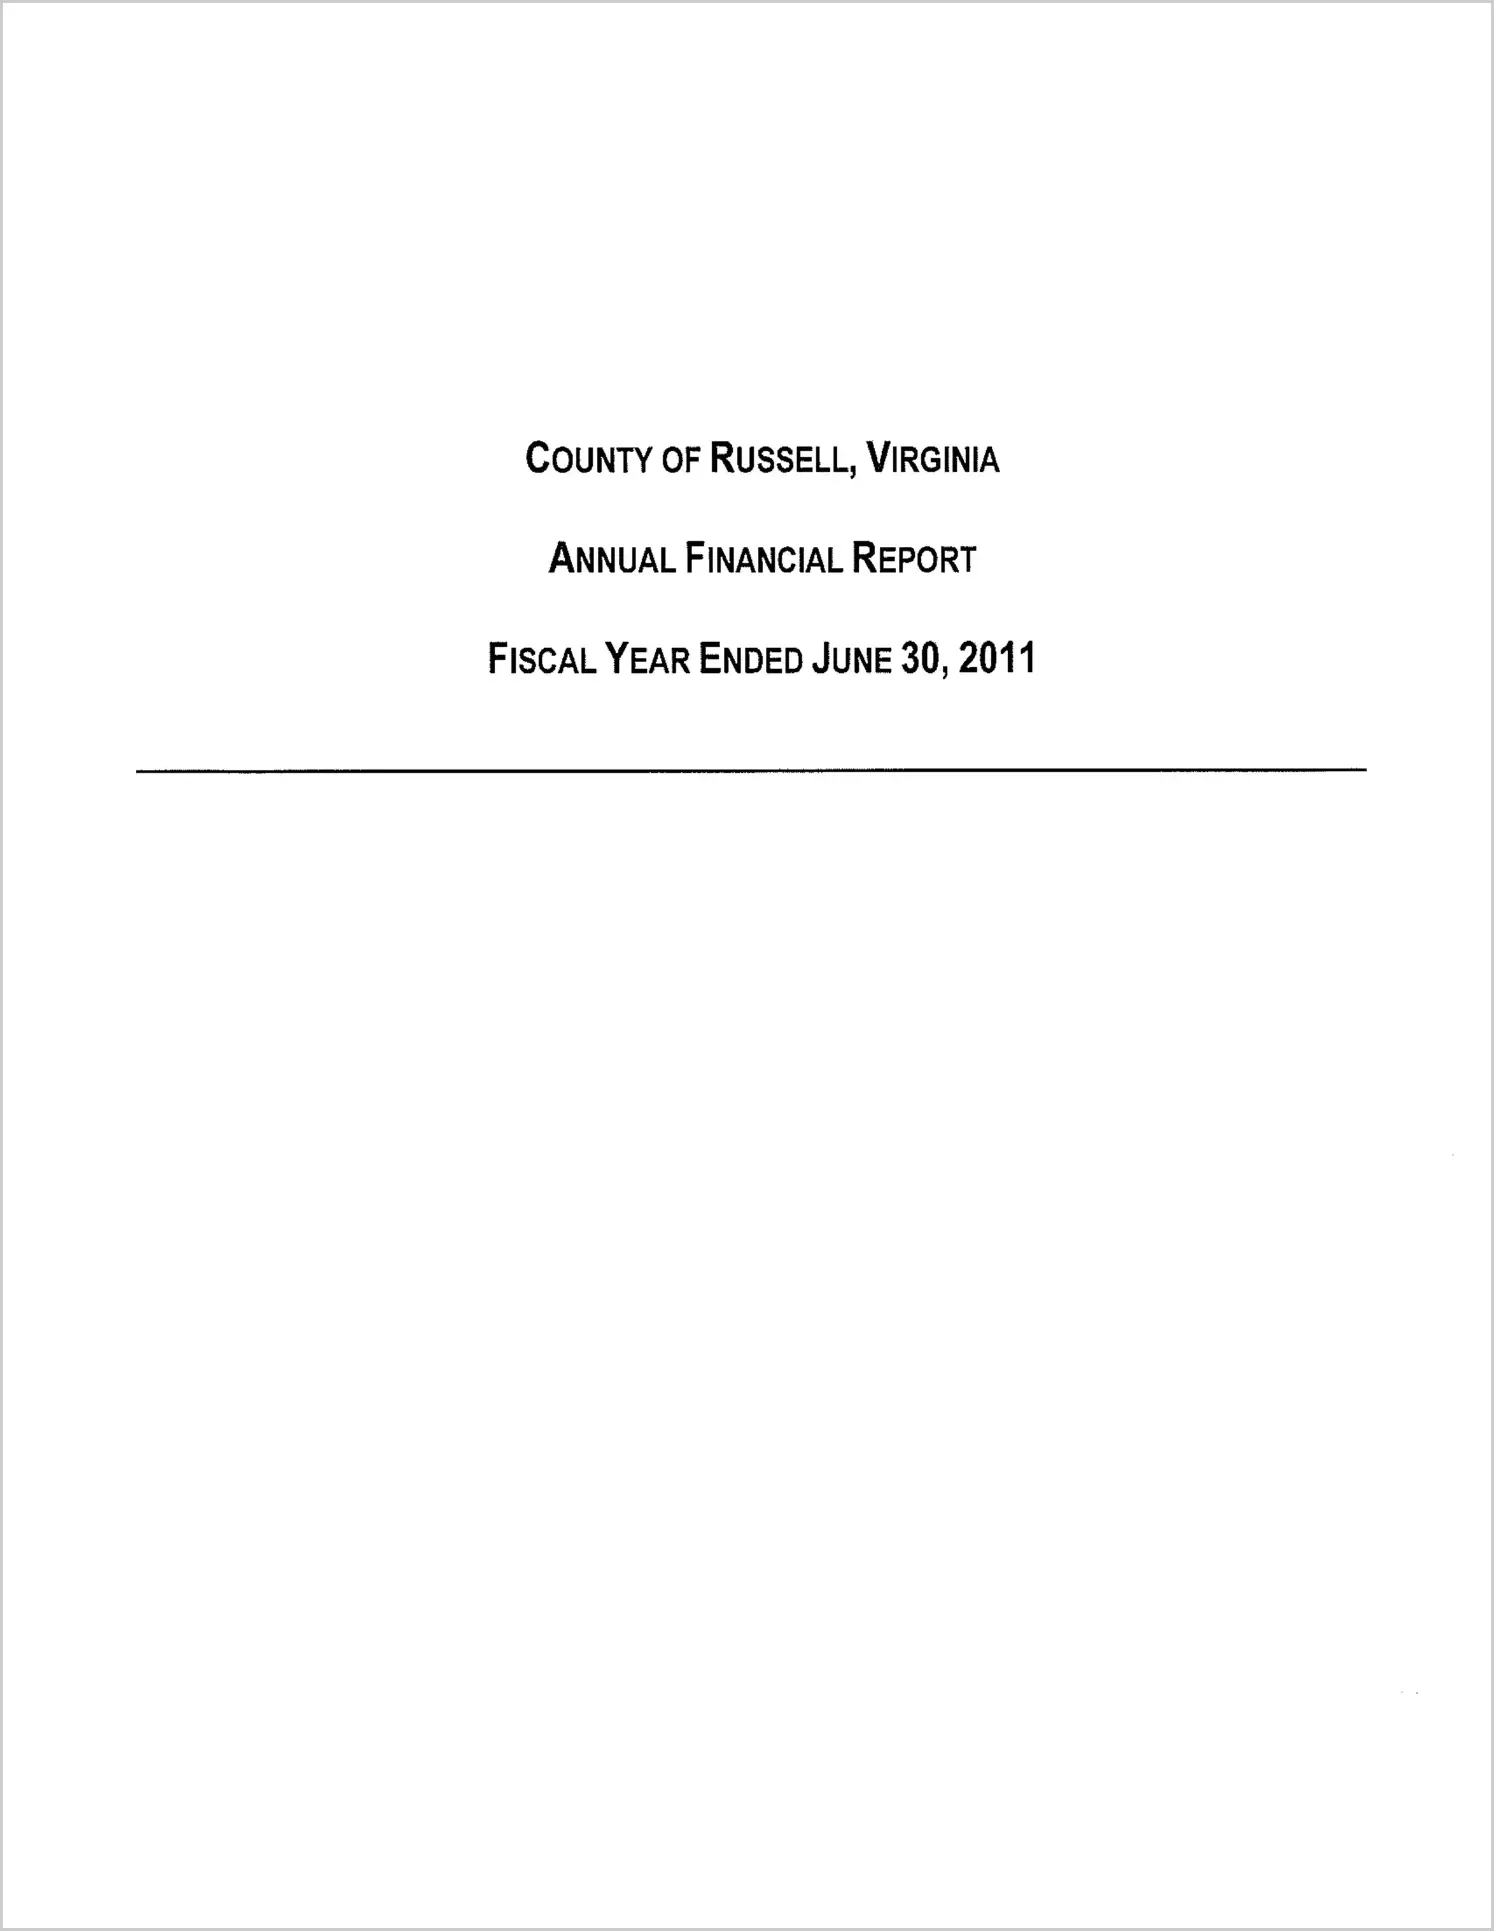 2011 Annual Financial Report for County of Russell